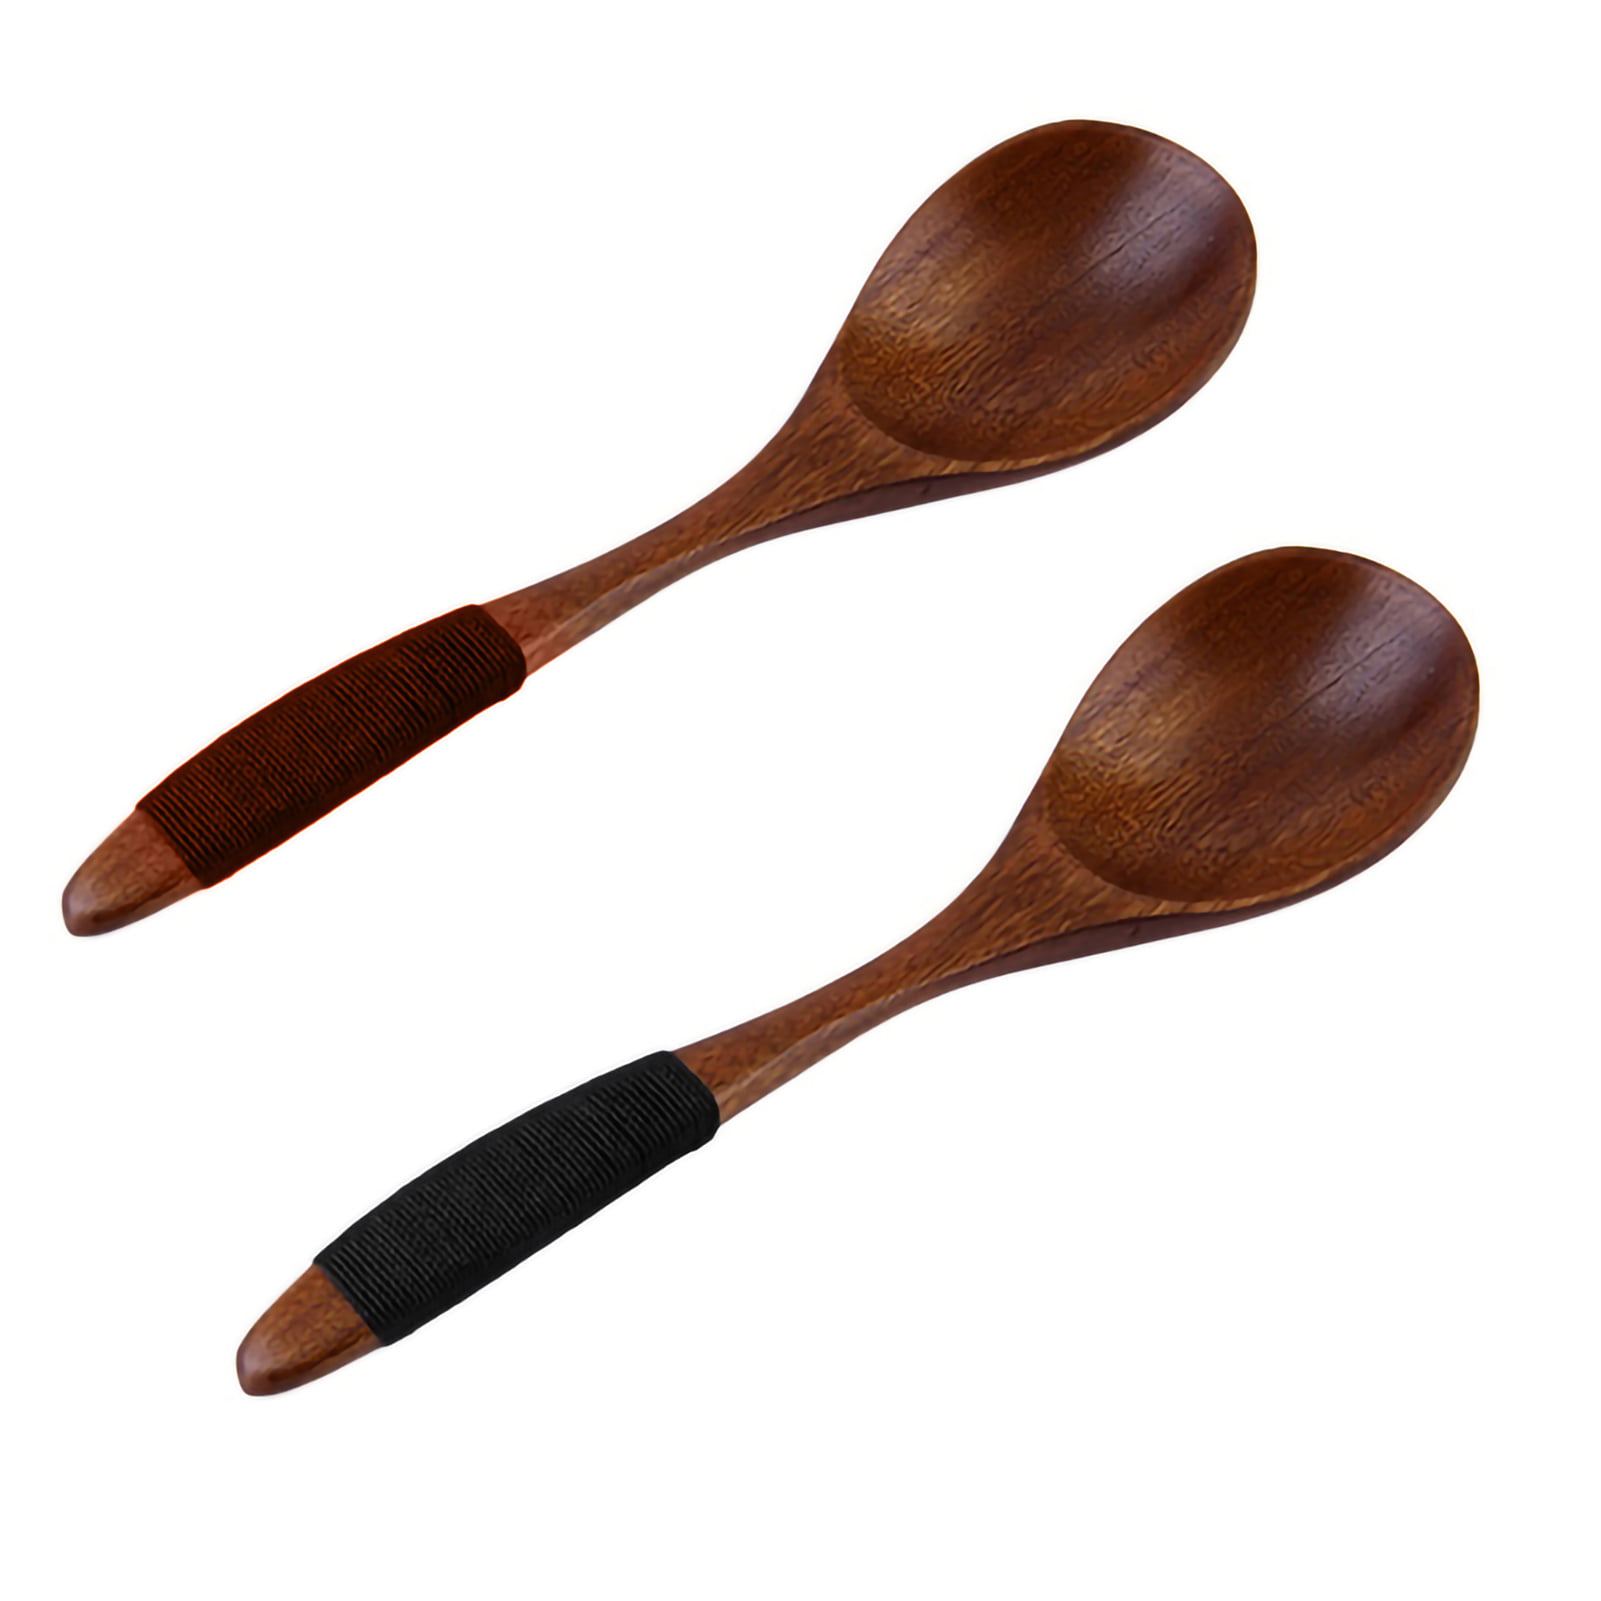 Spoons, Wooden Spoons for Eating,Ladle Spoon Set for Cooking Mixing Stirring Nonstick Pots Kitchen, sz3012